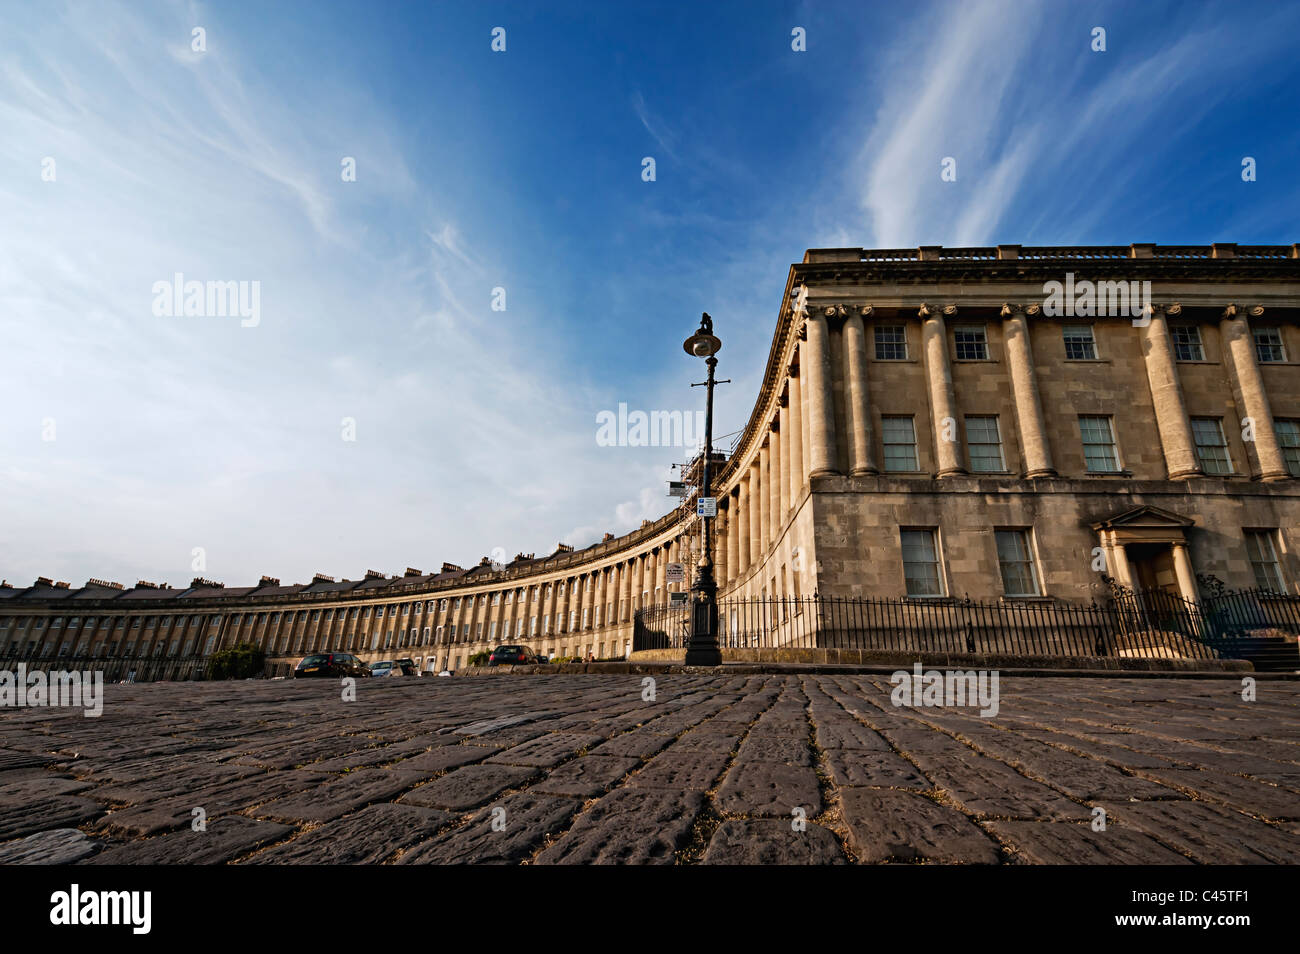 the Royal Crescent, Bath, Bath and North East Somerset, England, Great Britain, UK Stock Photo